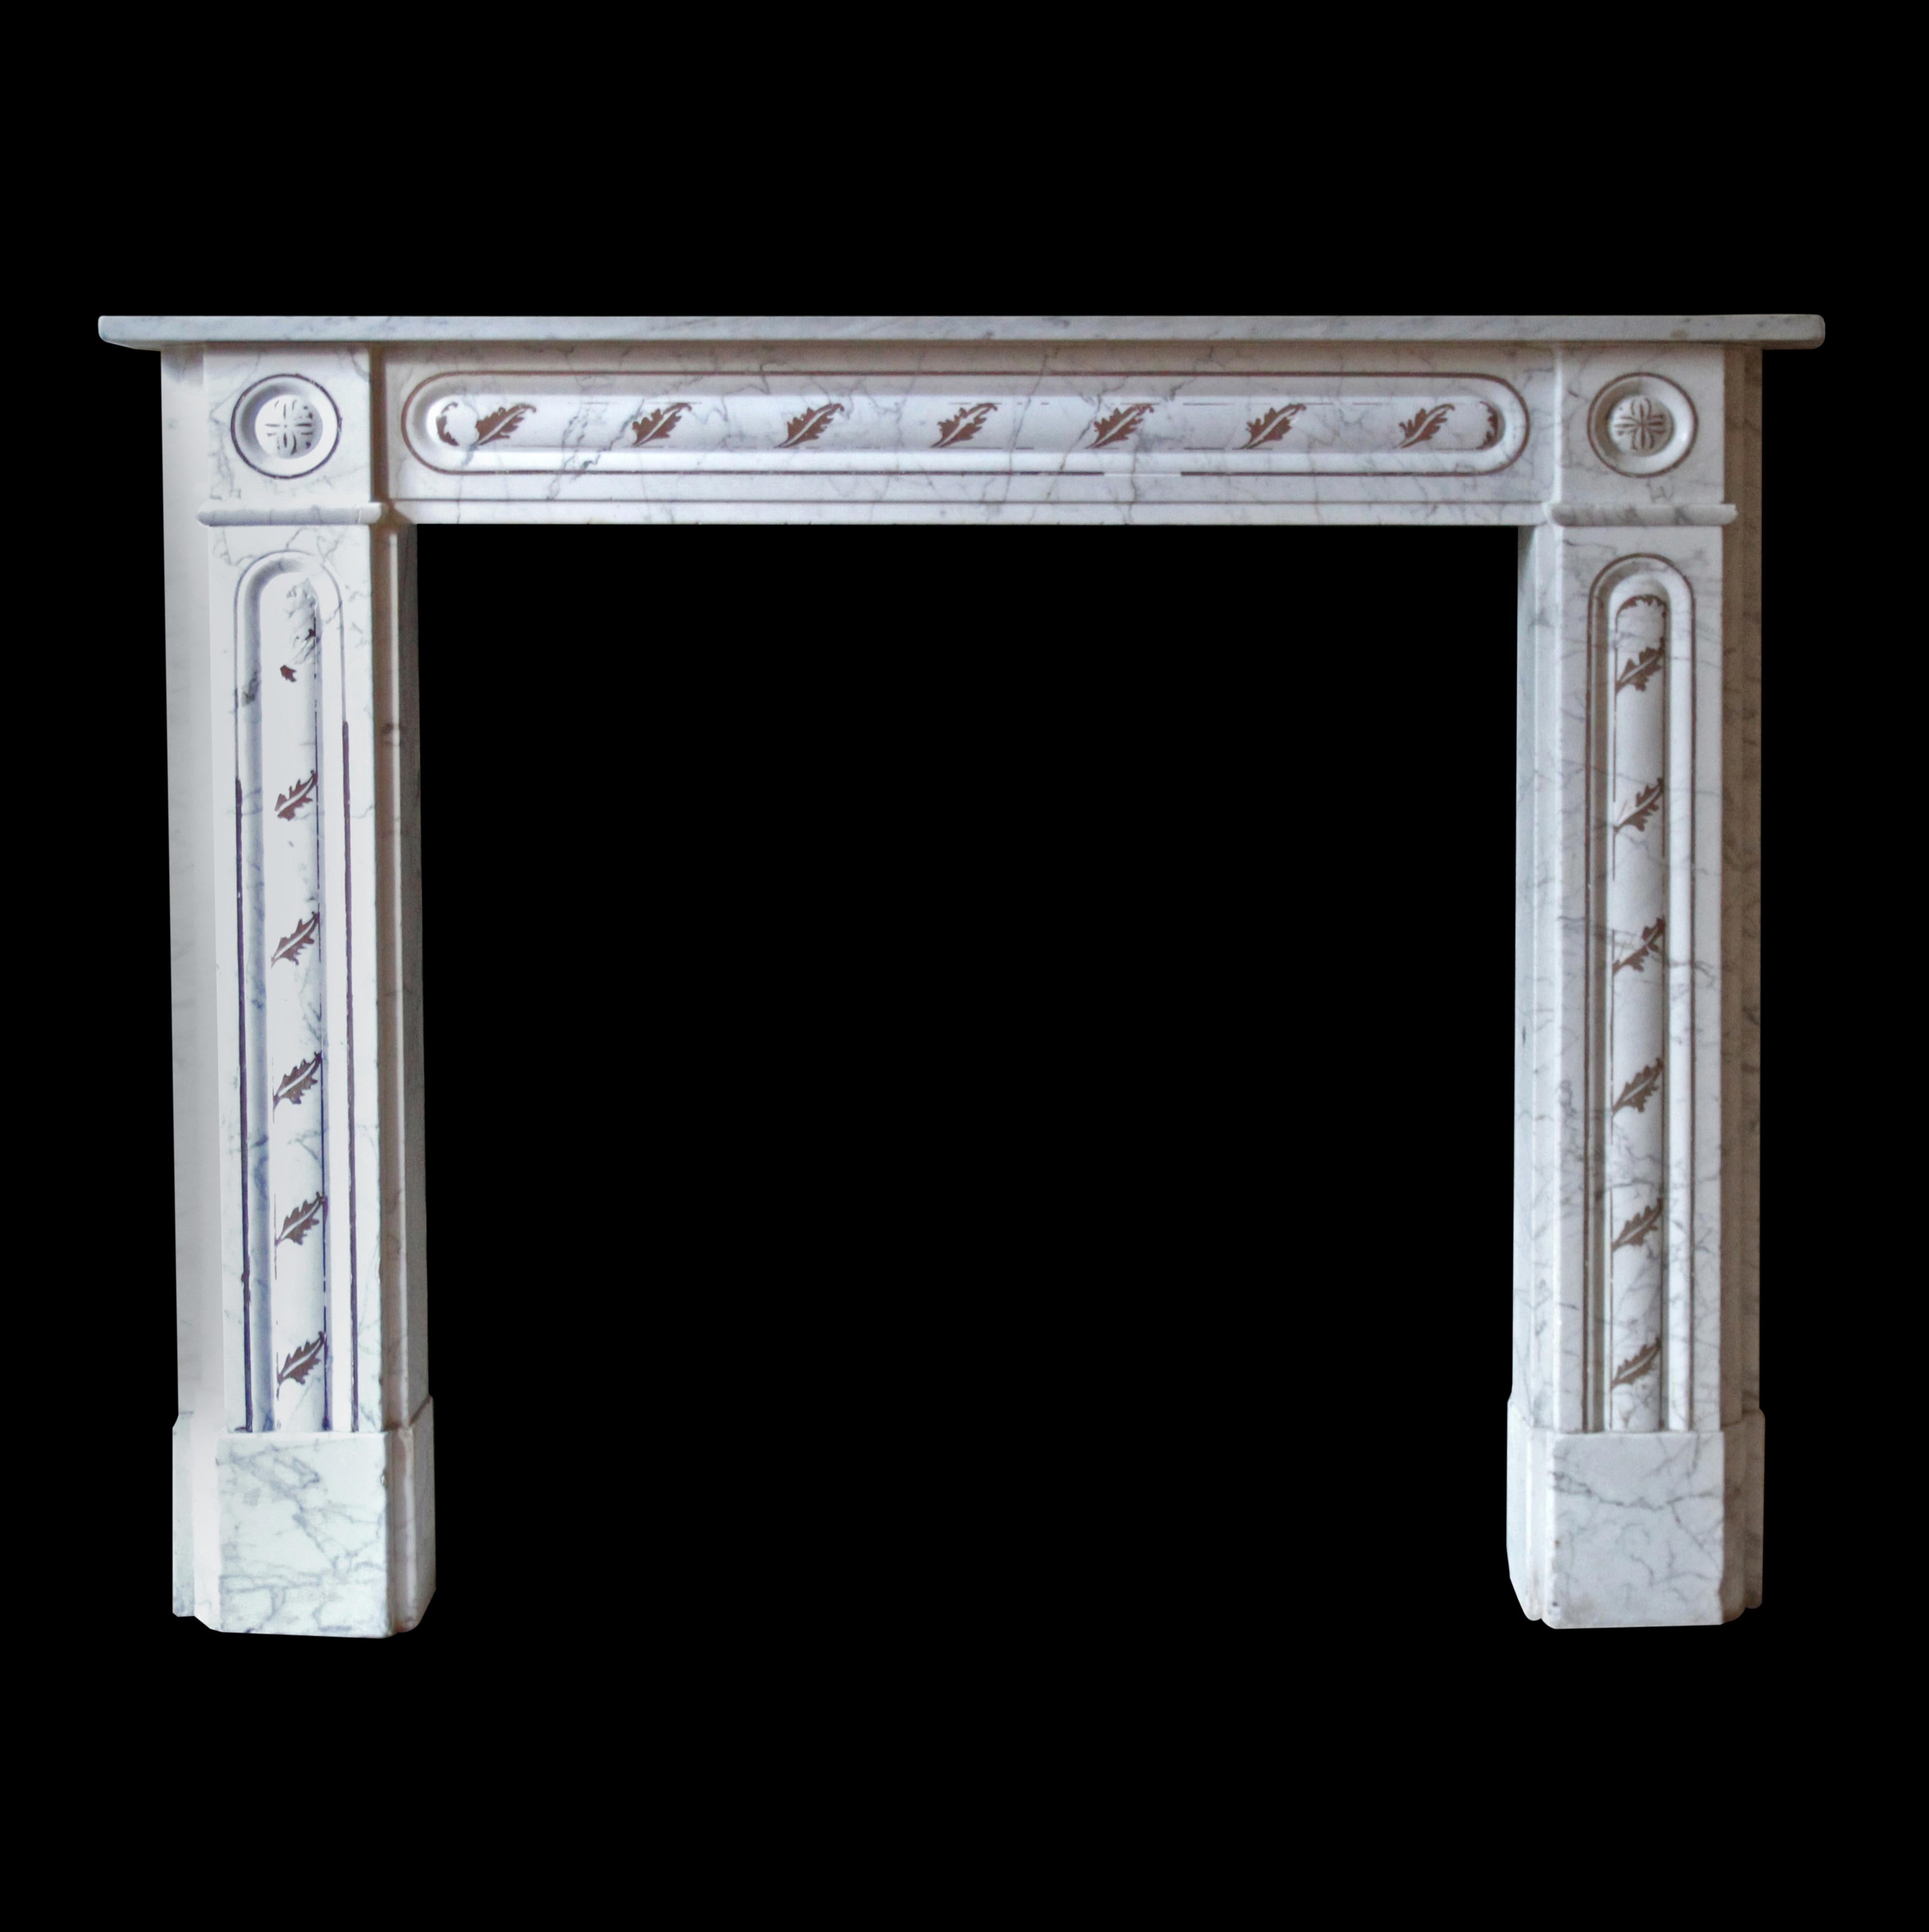 This English Regency style carrara white marble mantel is adorned with graceful gray veining that adds a touch of timeless elegance. An intricate decorative brown leaf detail graces the upper header and legs, enhancing its visual appeal. Among a